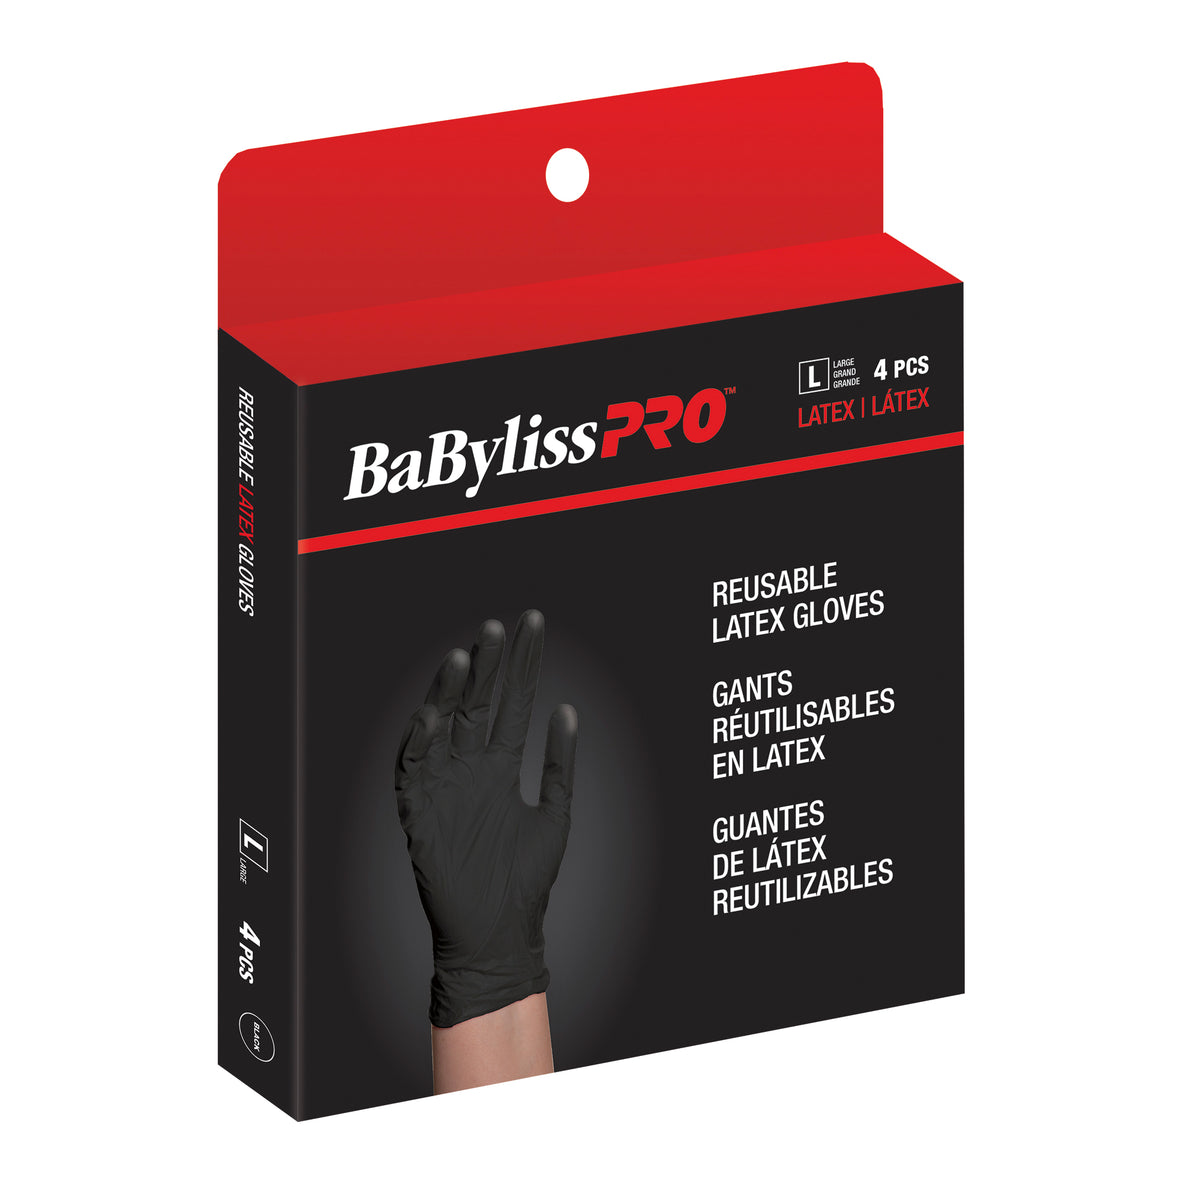 BaBylissPRO Reusable Latex Gloves, Large – Box of 4